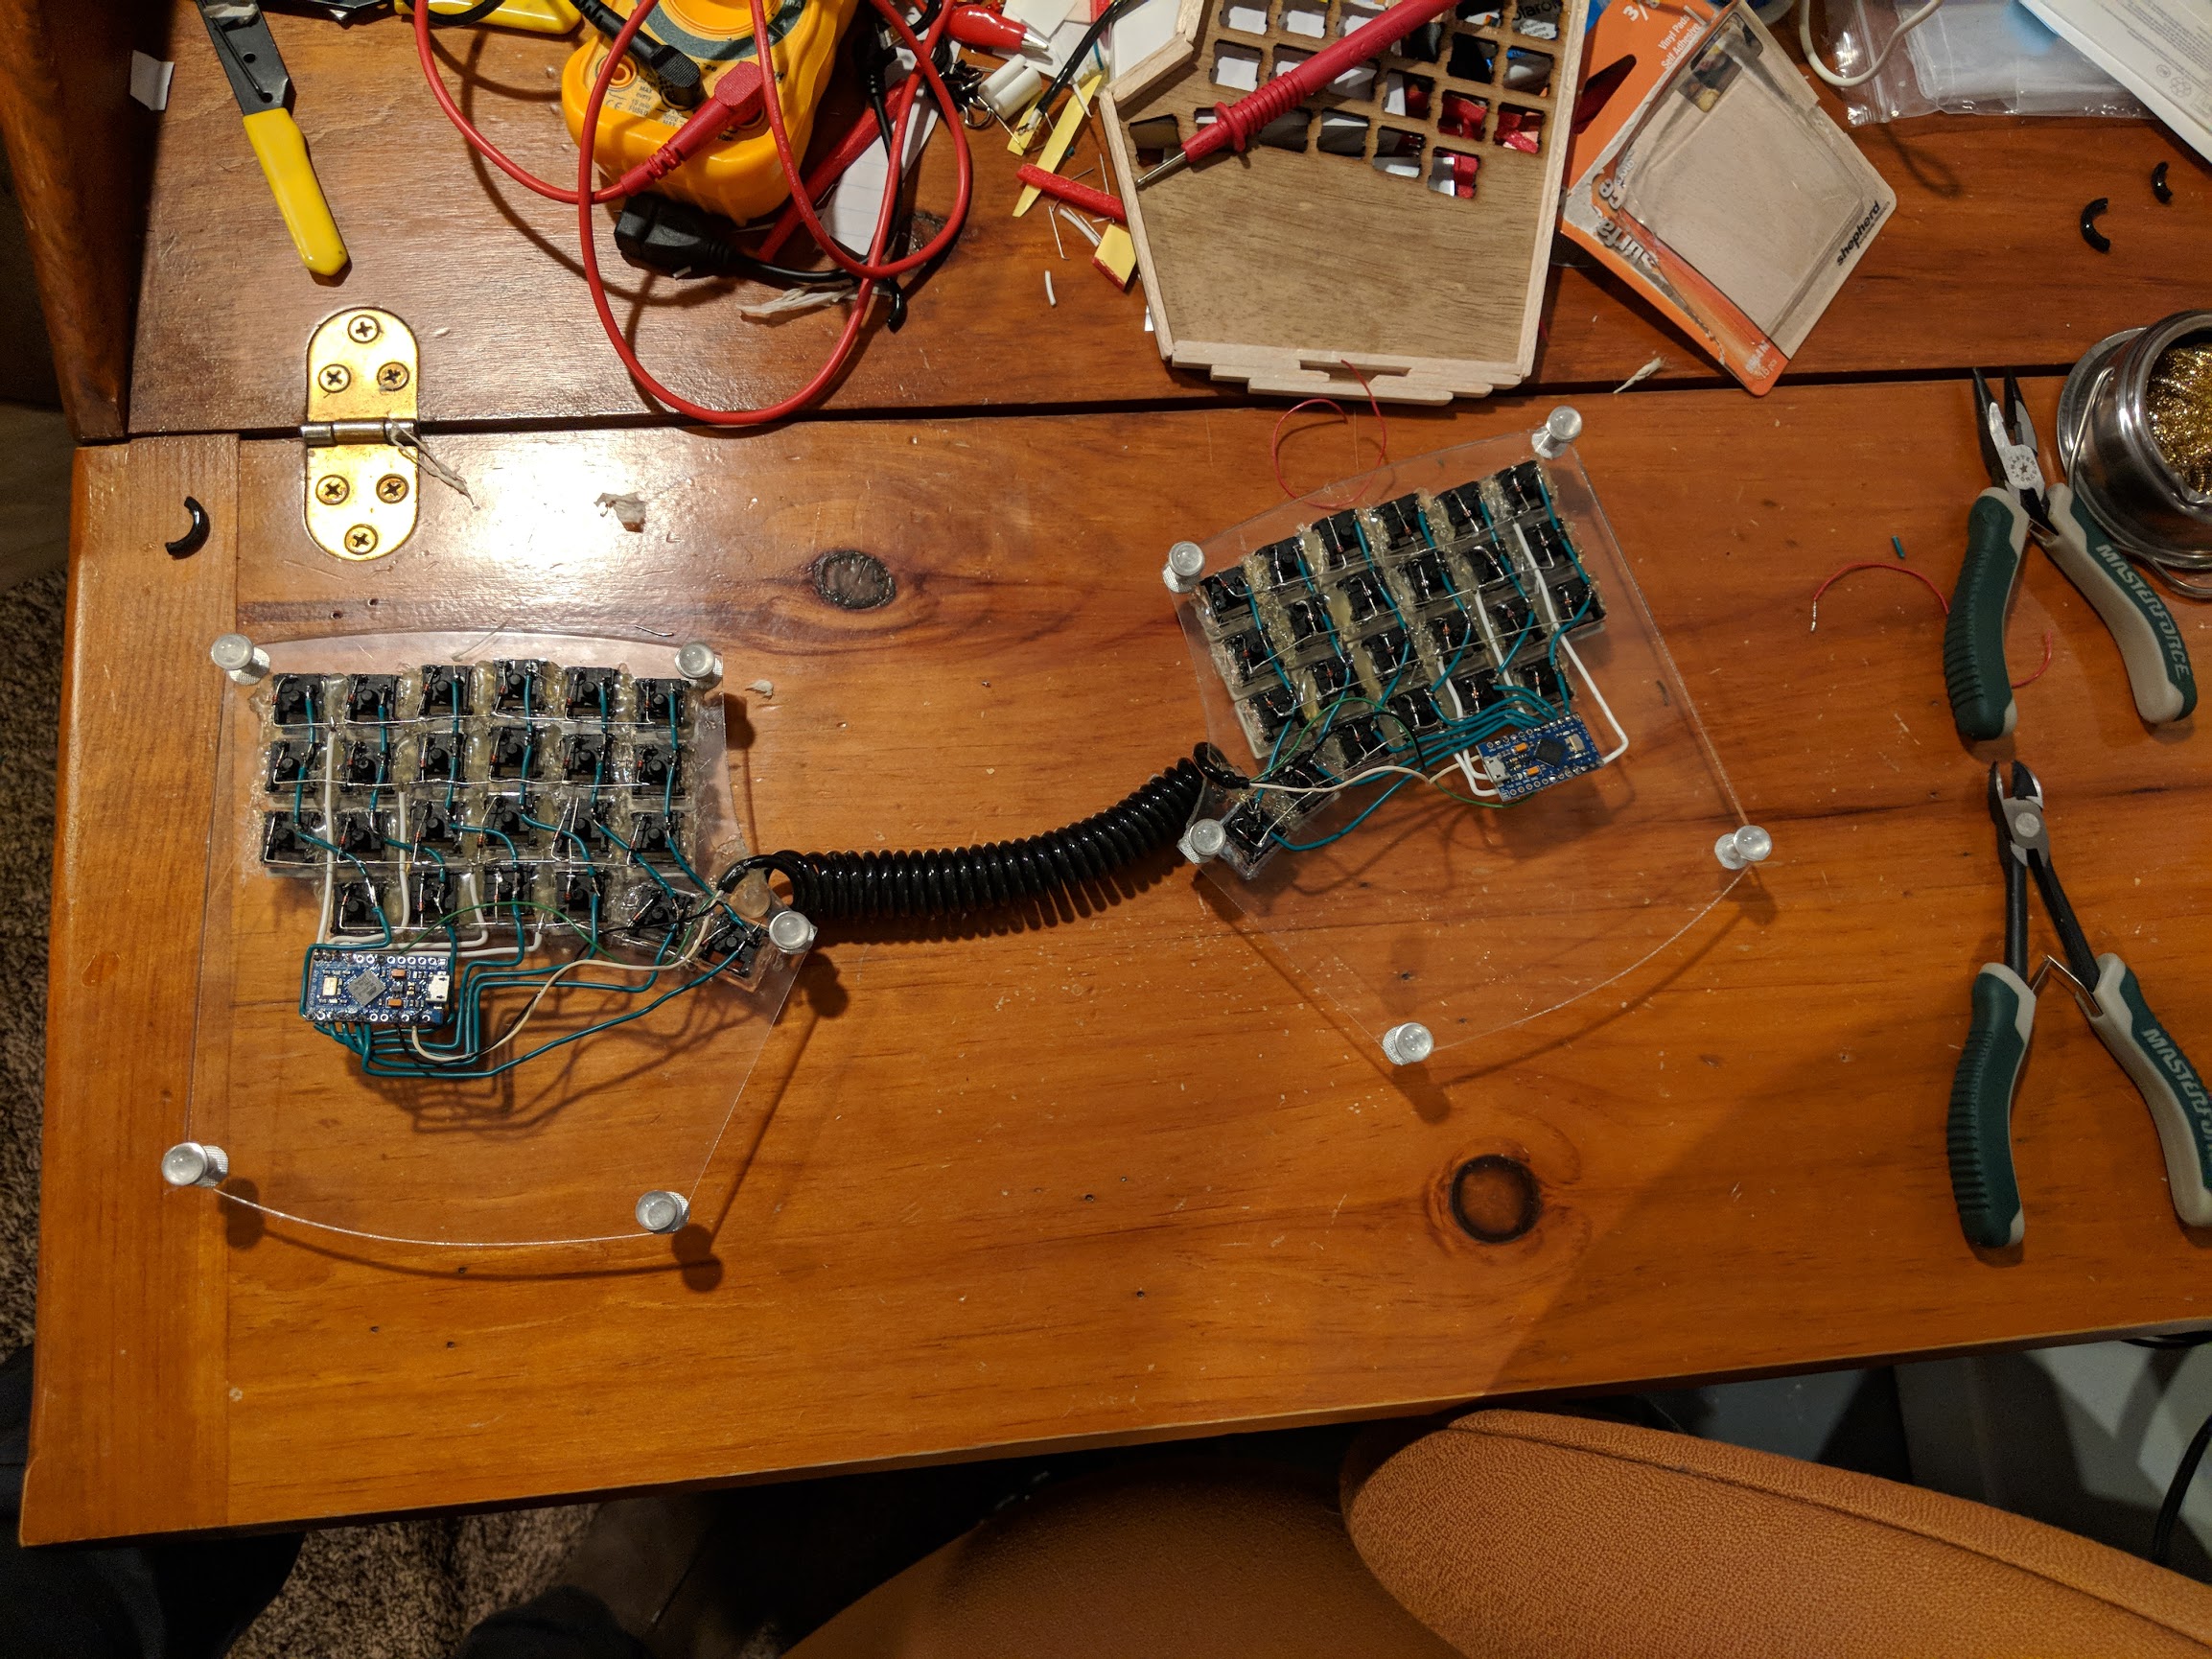 Bottom of transparent keyboard plates with micro controllers installed and a wire connecting them slit